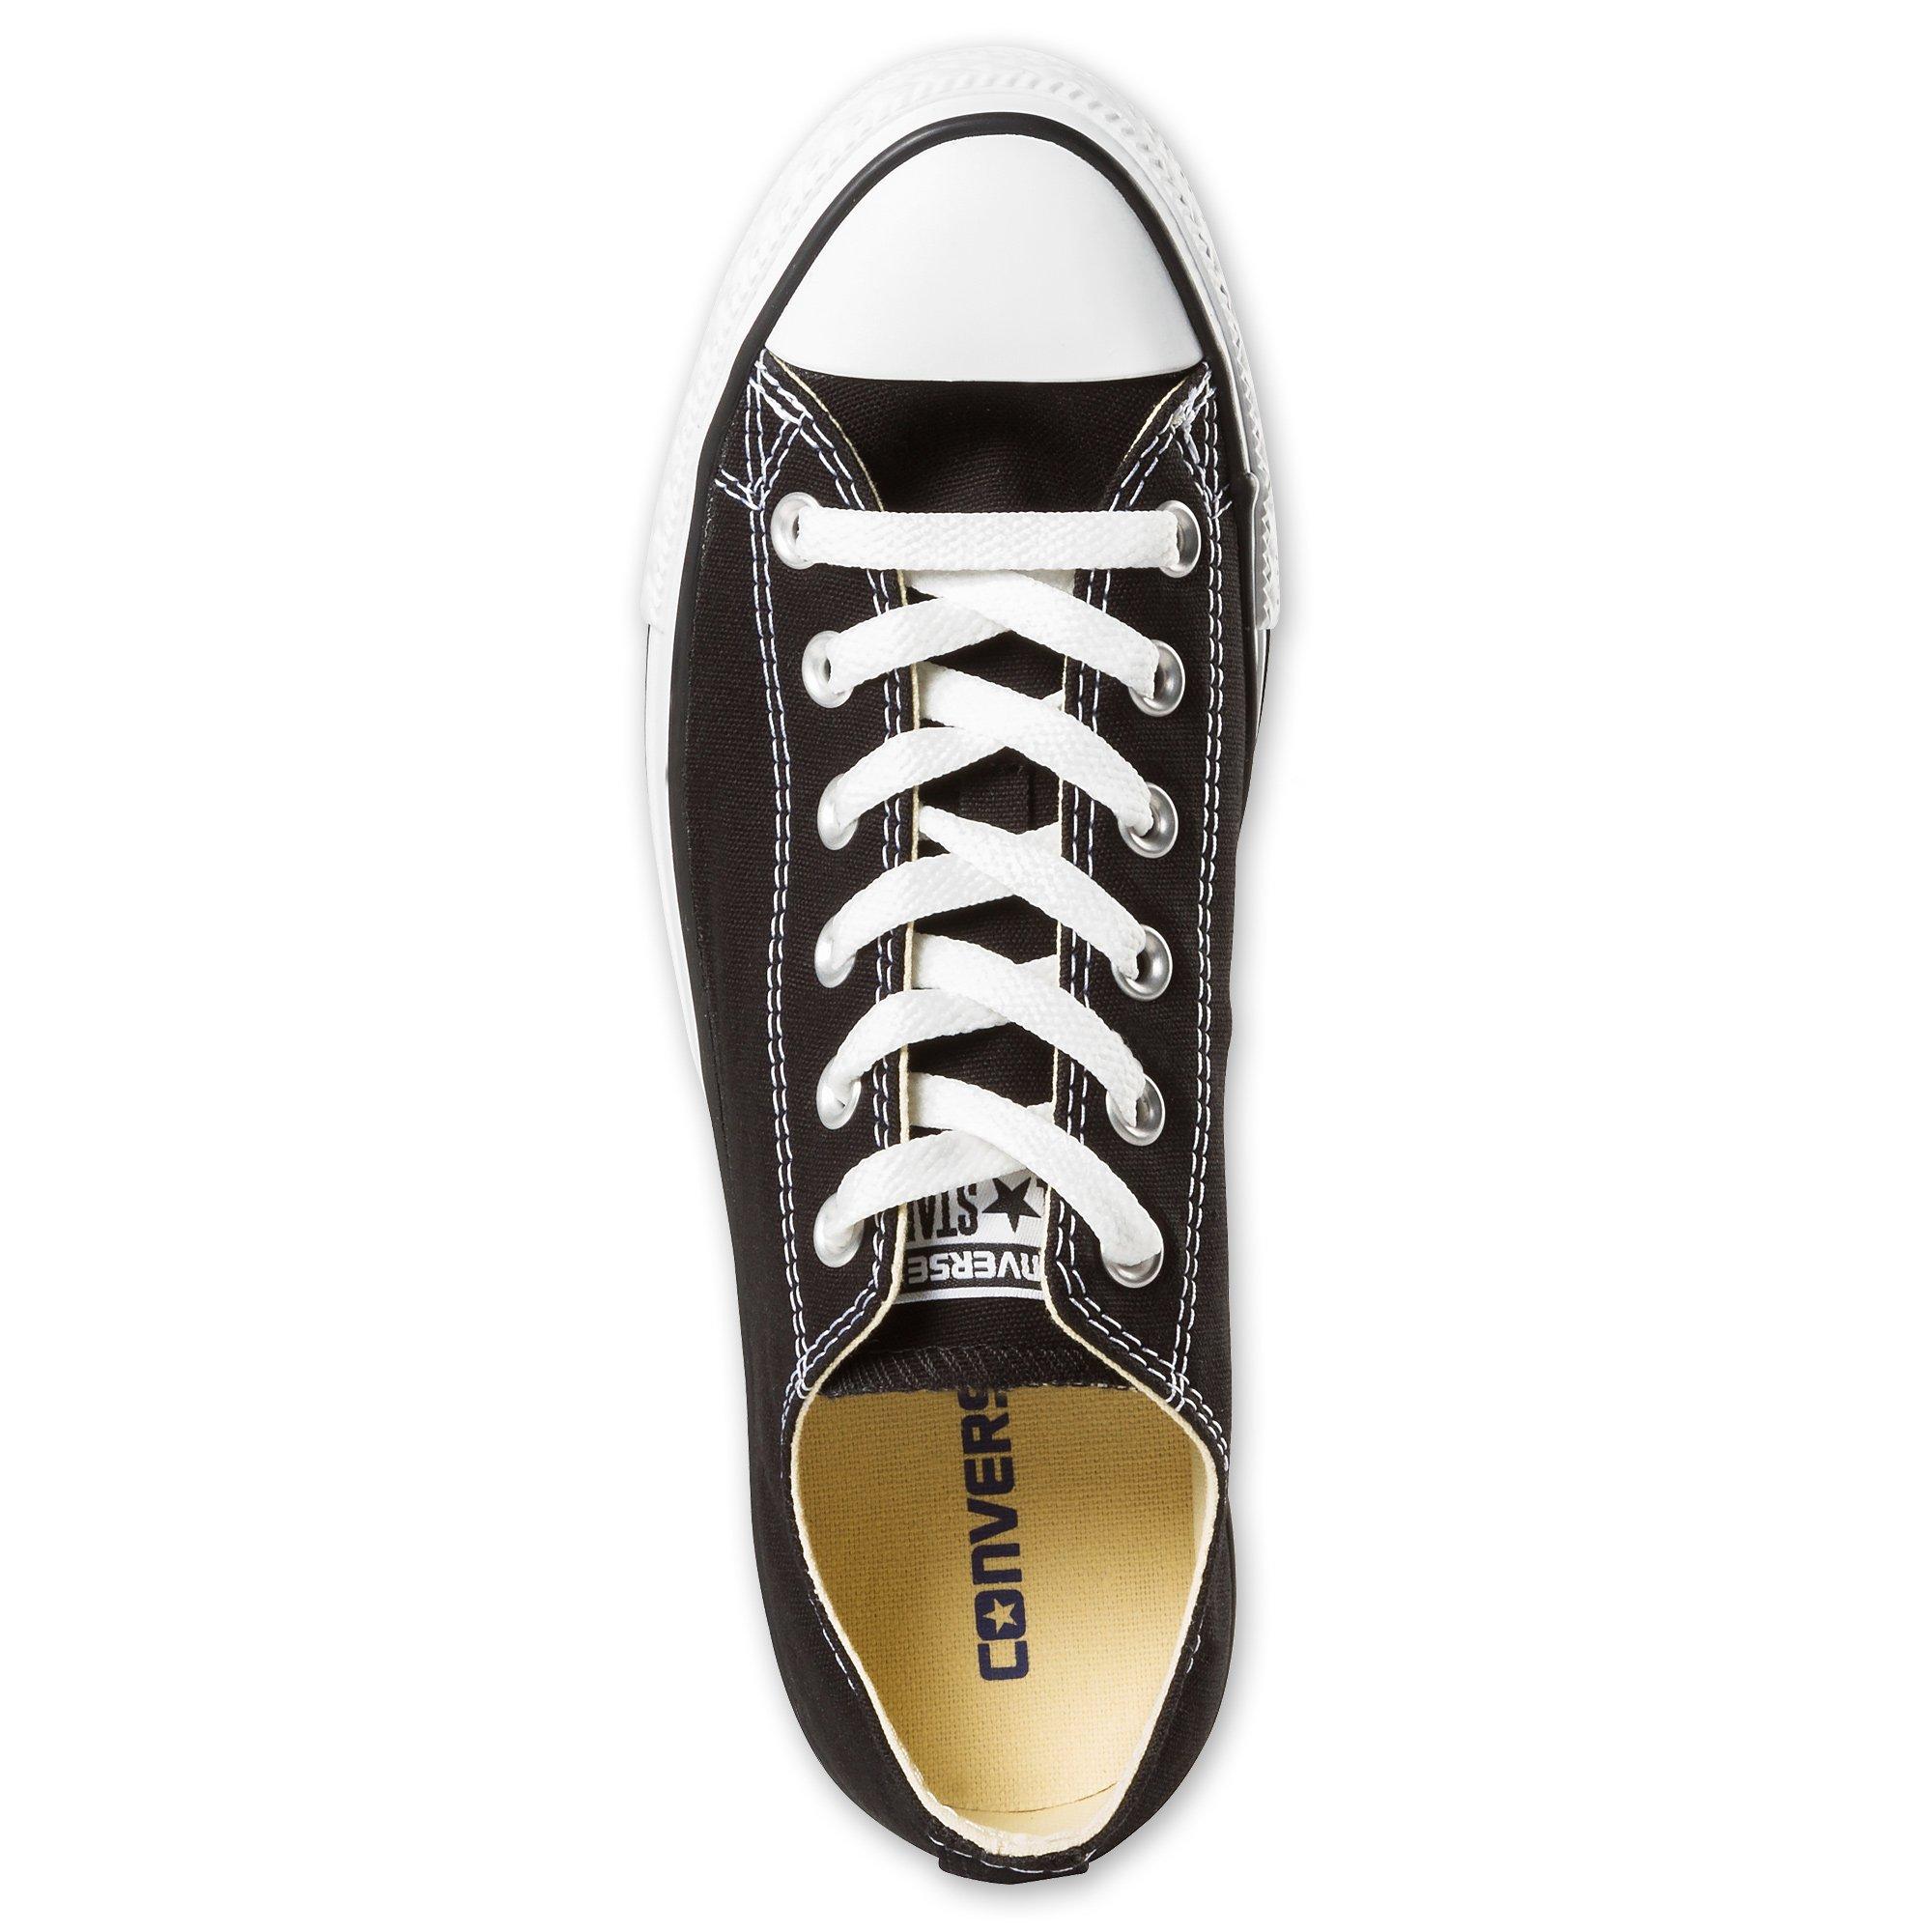 CONVERSE Chuck Taylor All Star Sneakers, Low Top 